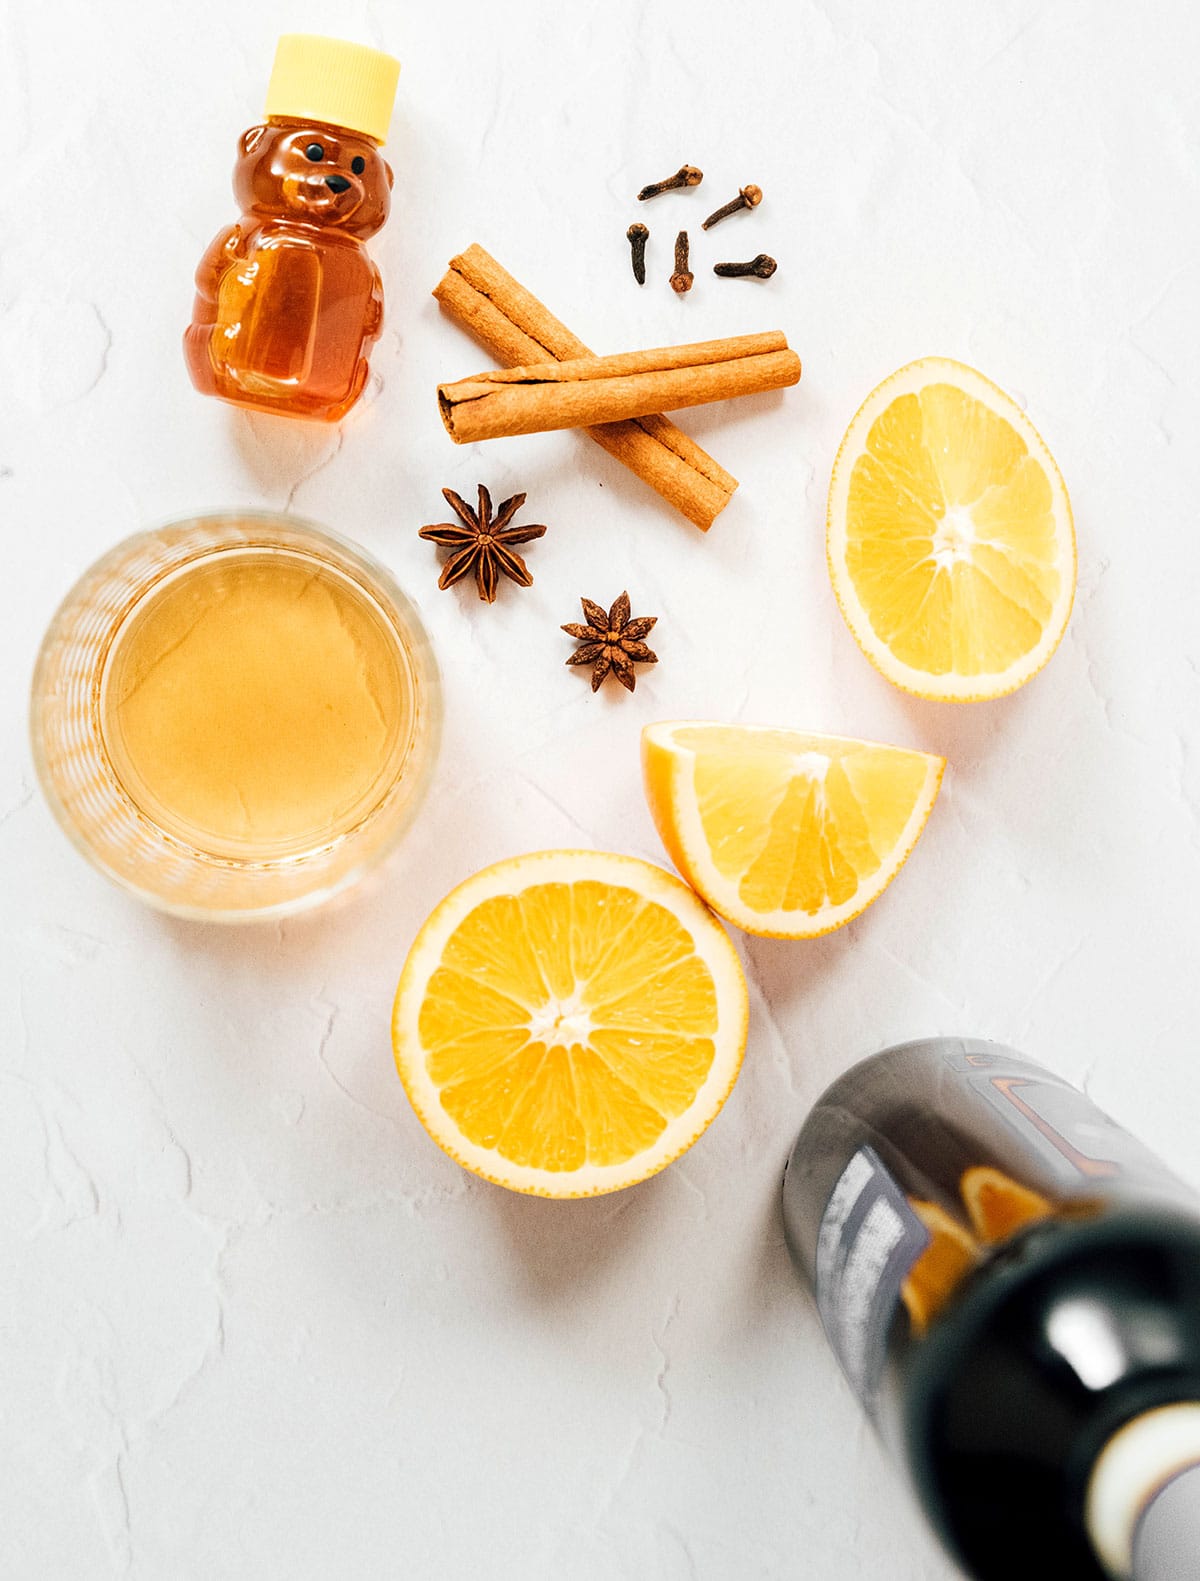 Honey, star anise, cinnamon sticks, a sliced orange, and other gluhwein ingredients arranged on a white background